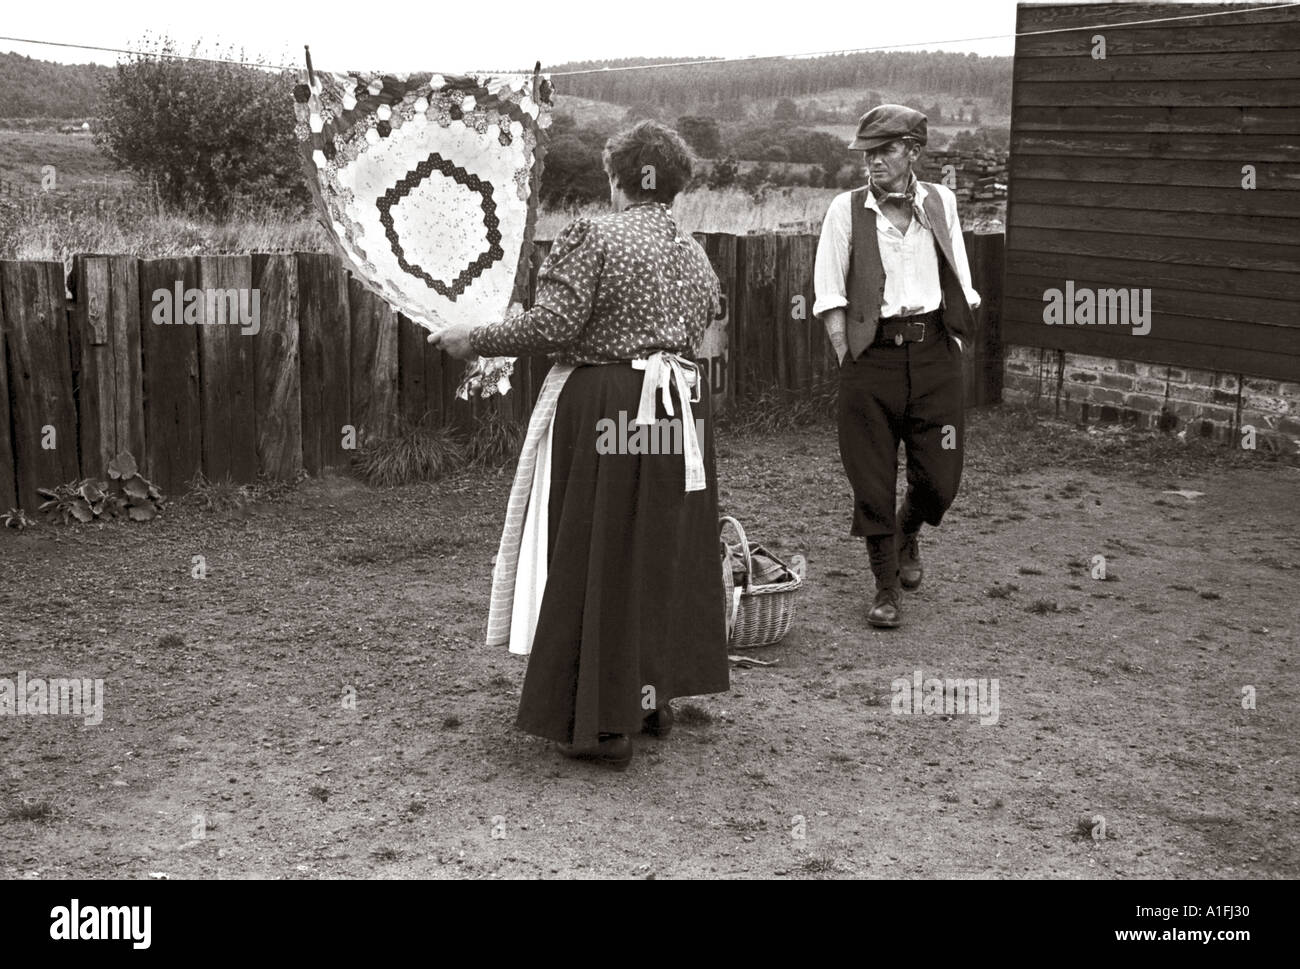 Man and woman in period costume at Beamish folk museum Stock Photo